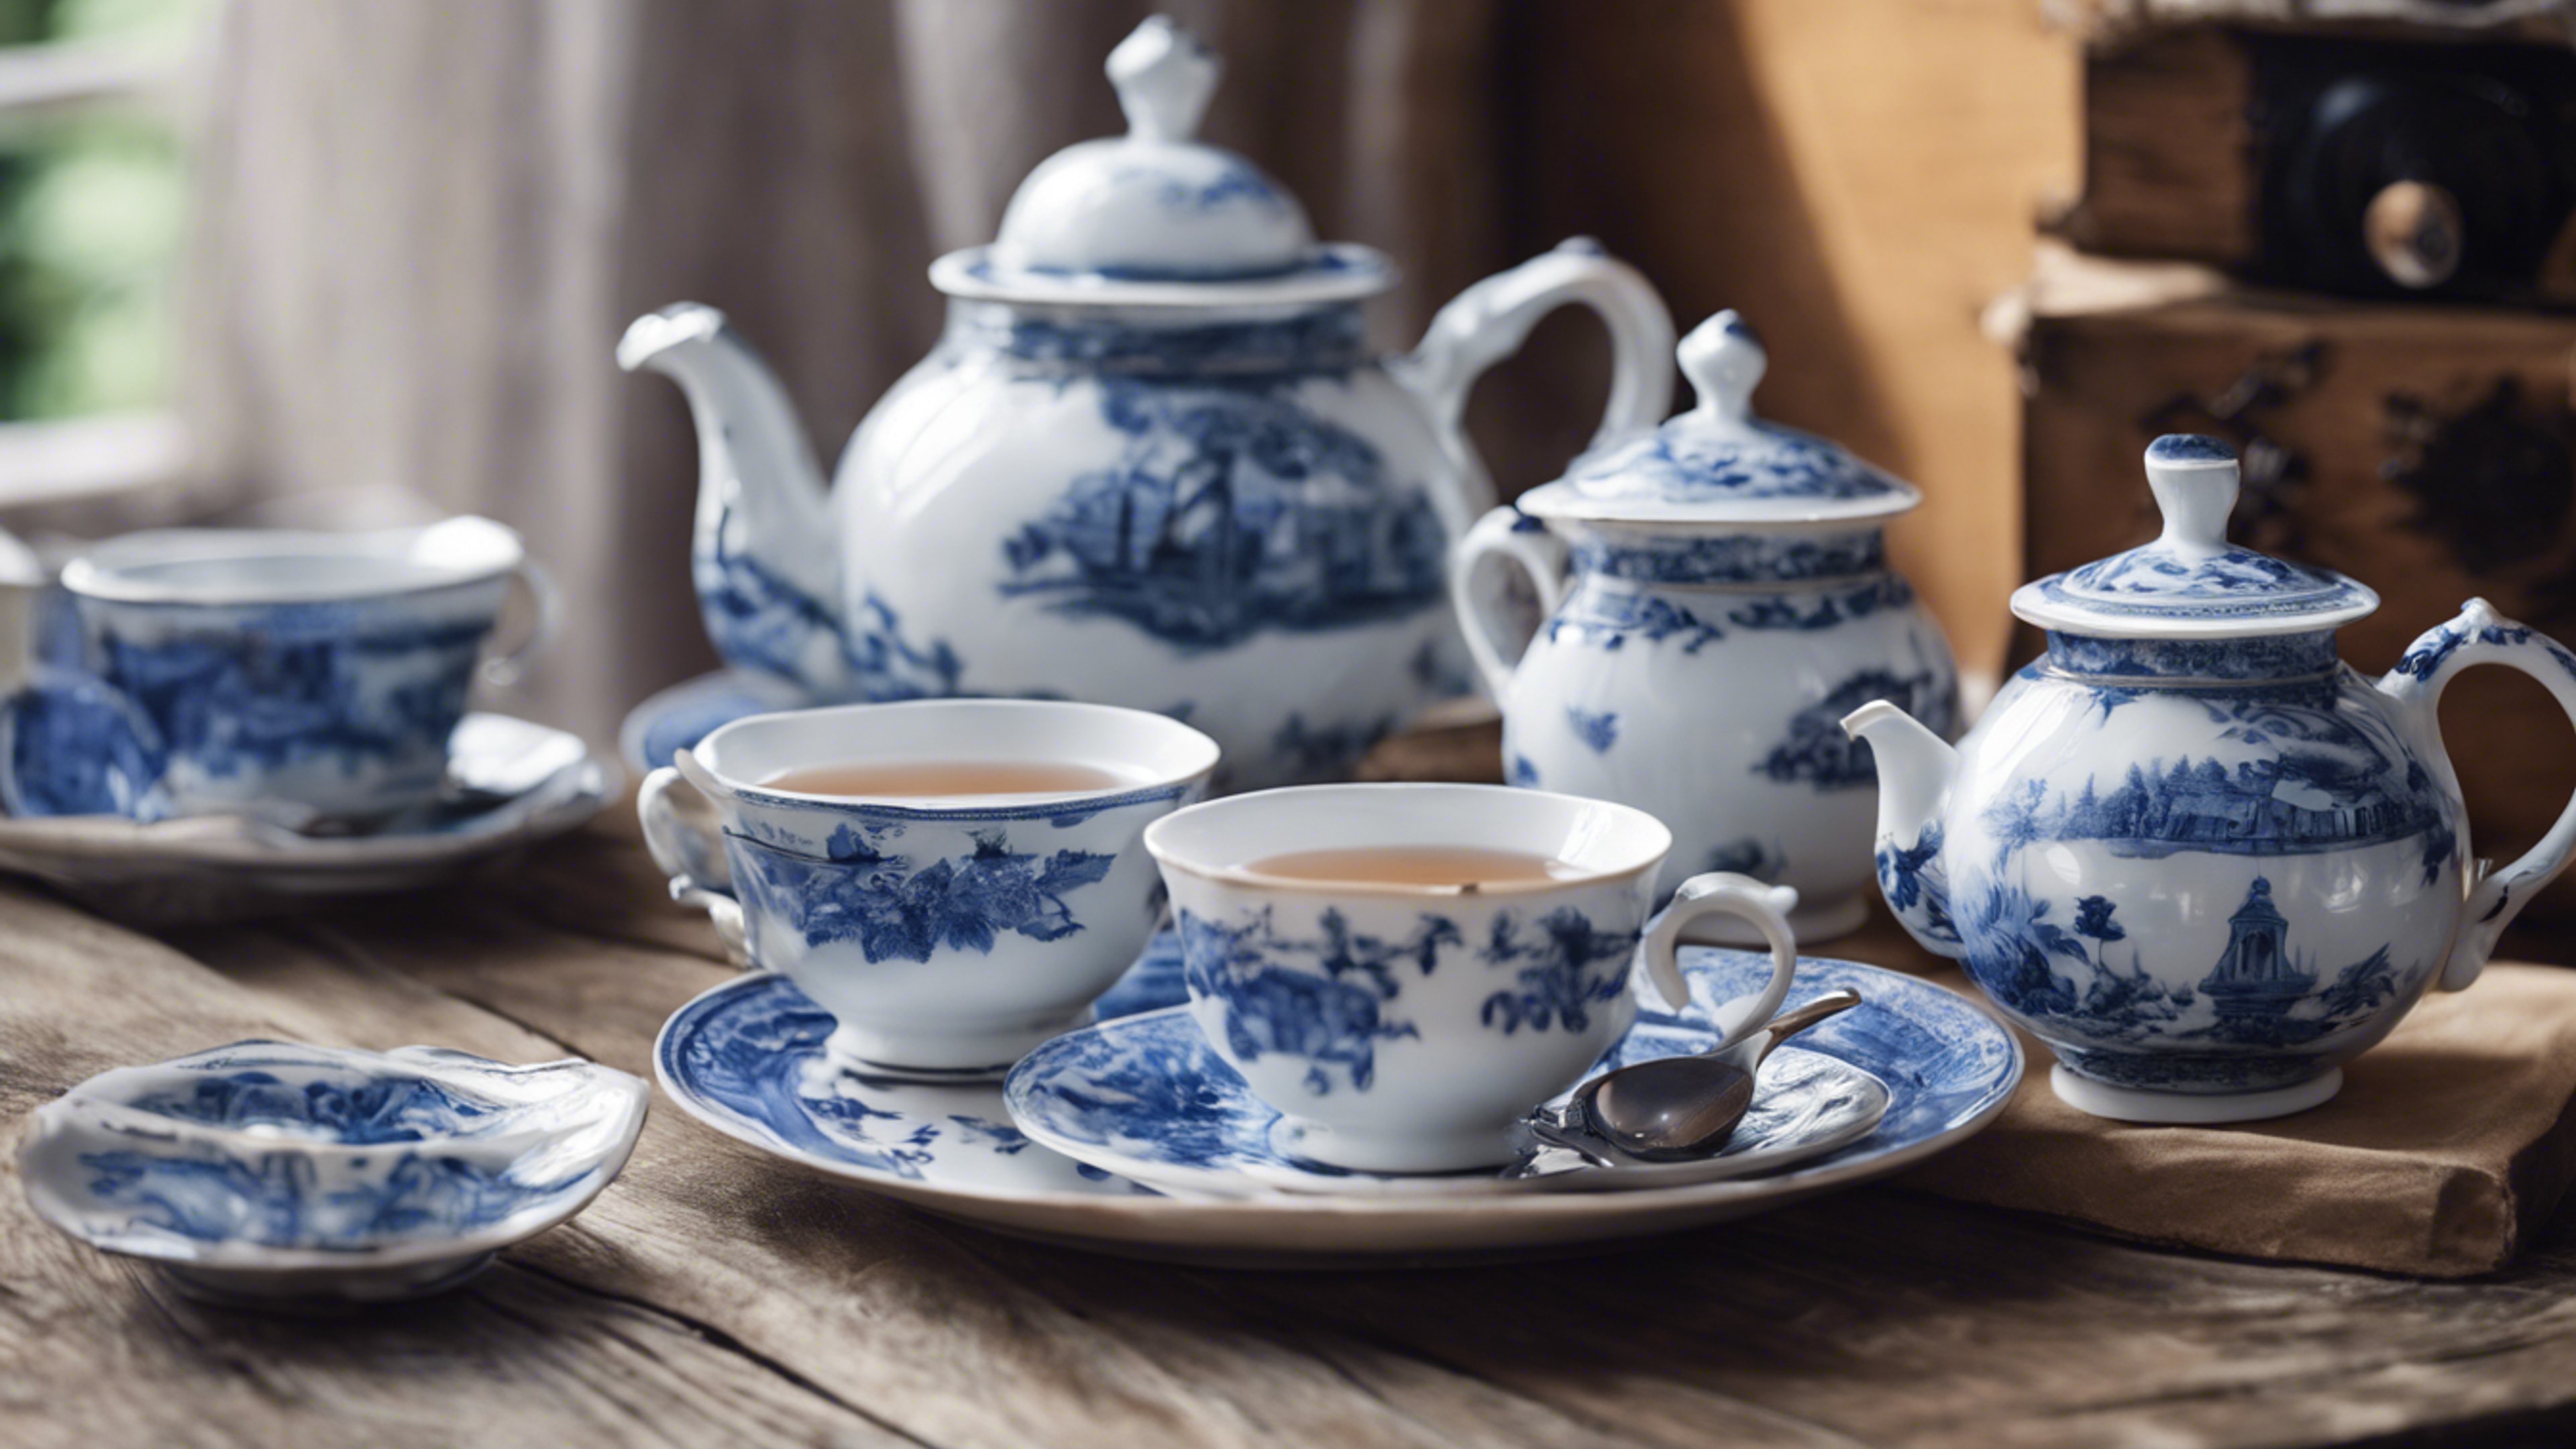 Vintage porcelain tea set in blue and white, placed on a rustic wooden table. Шпалери[4fbd951e4e494dd09da7]